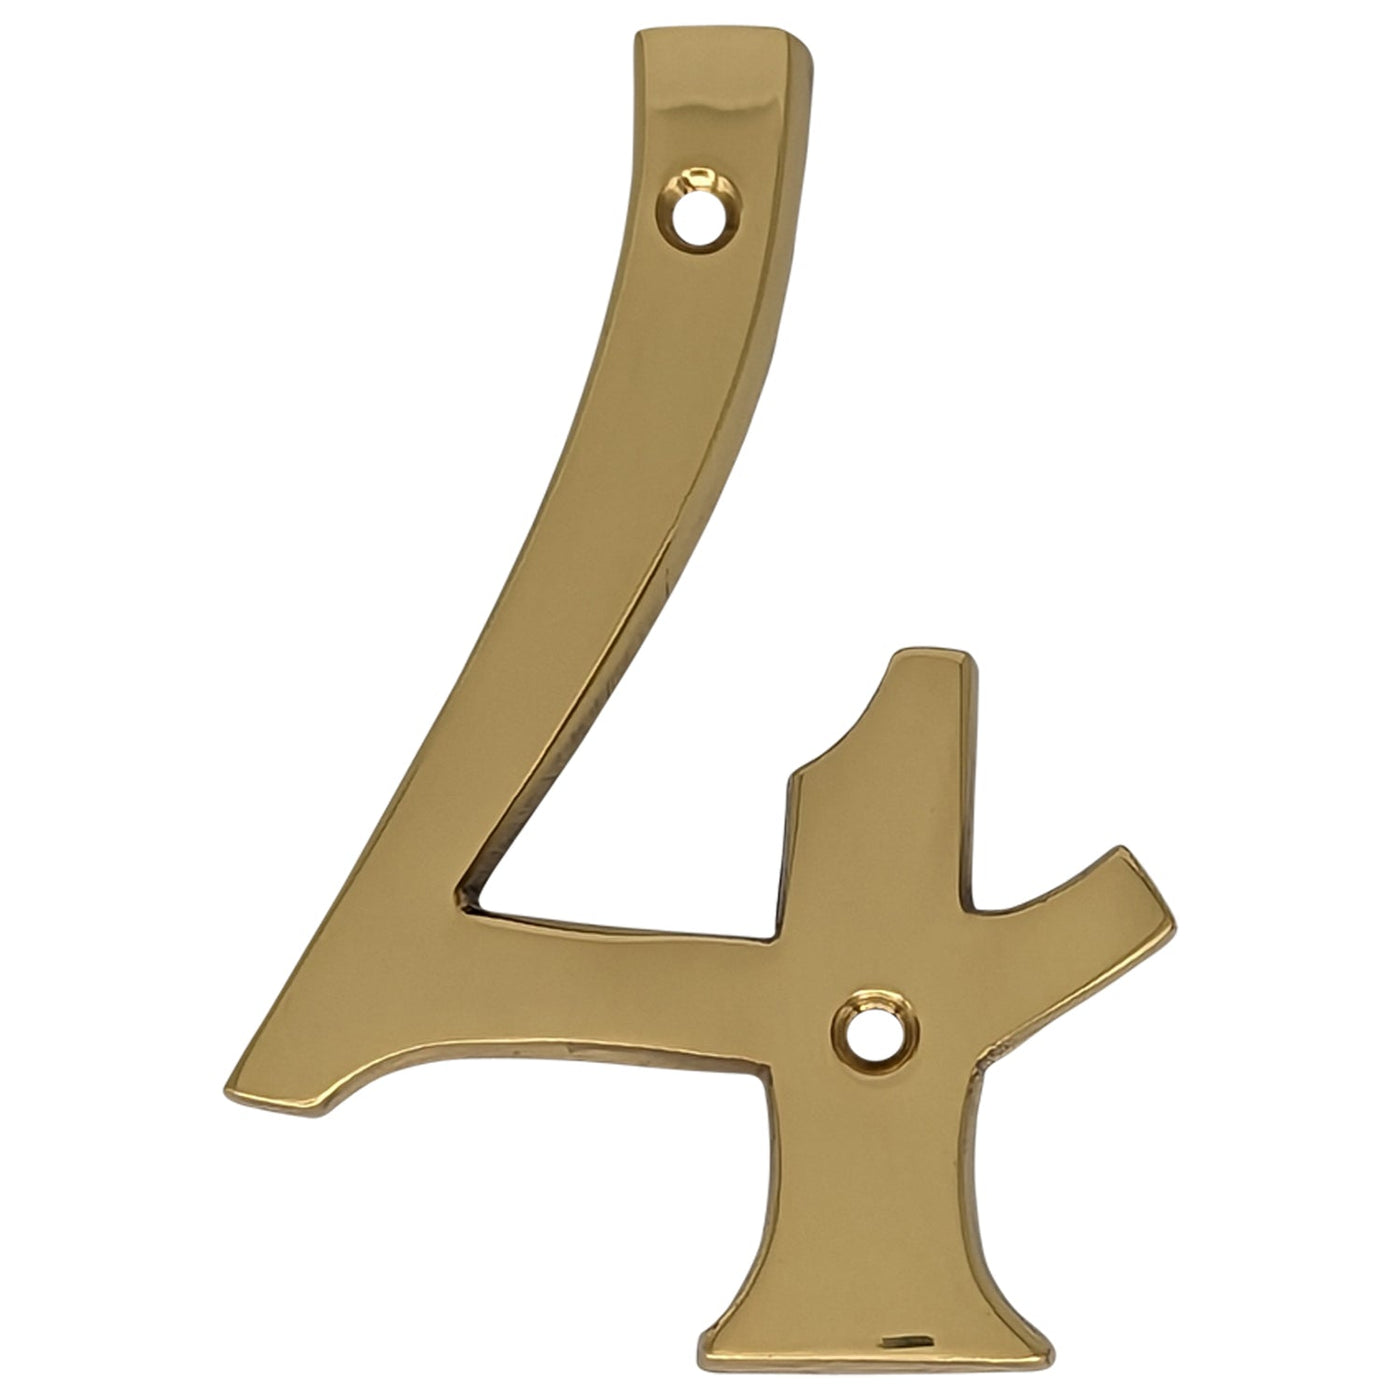 4 Inch Tall House Number 4